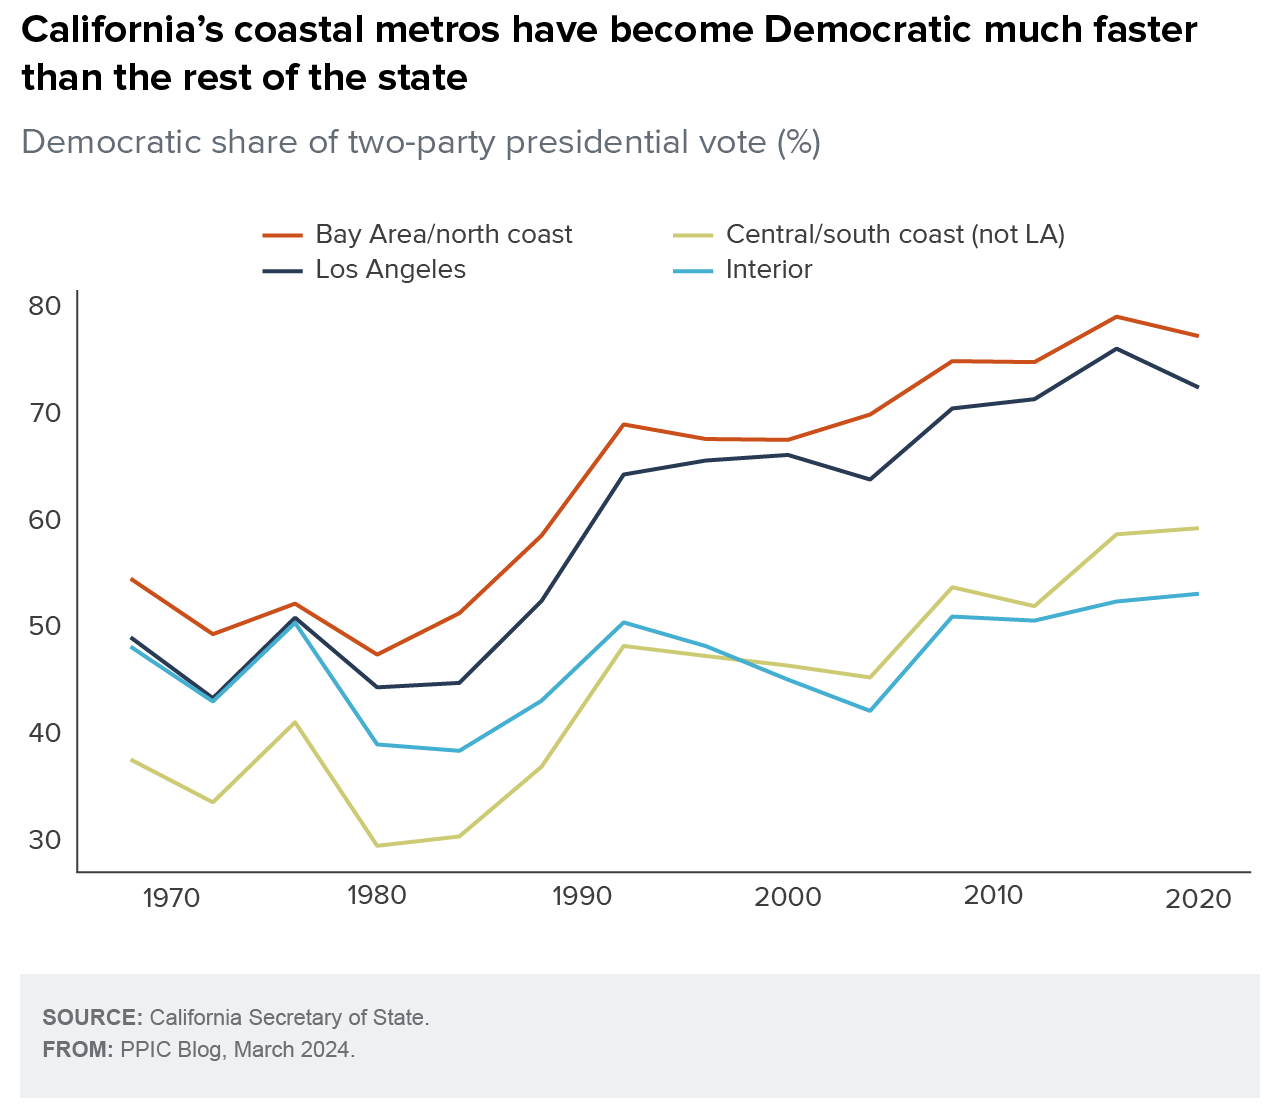 figure - California’s coastal metros have become Democratic much faster than the rest of the state